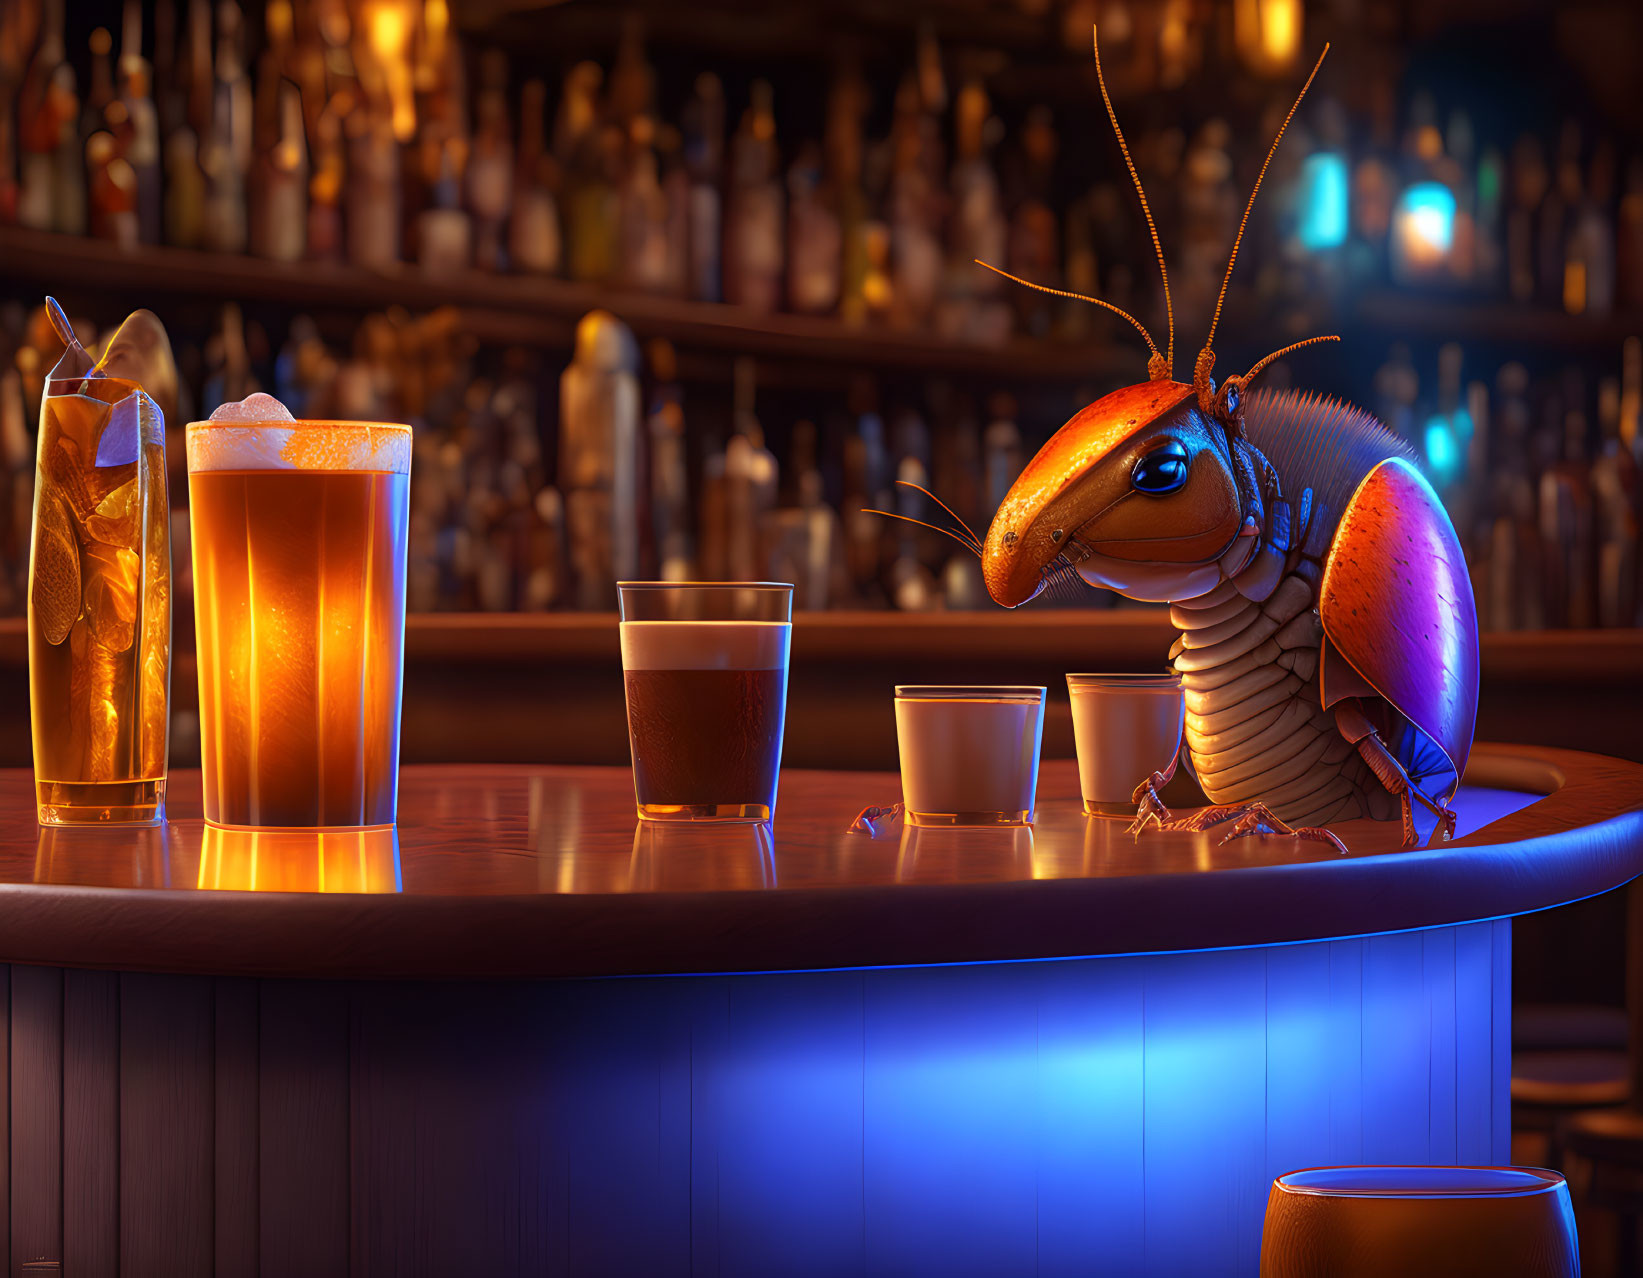 Animated cockroach in contemplative pose at bar with drinks.